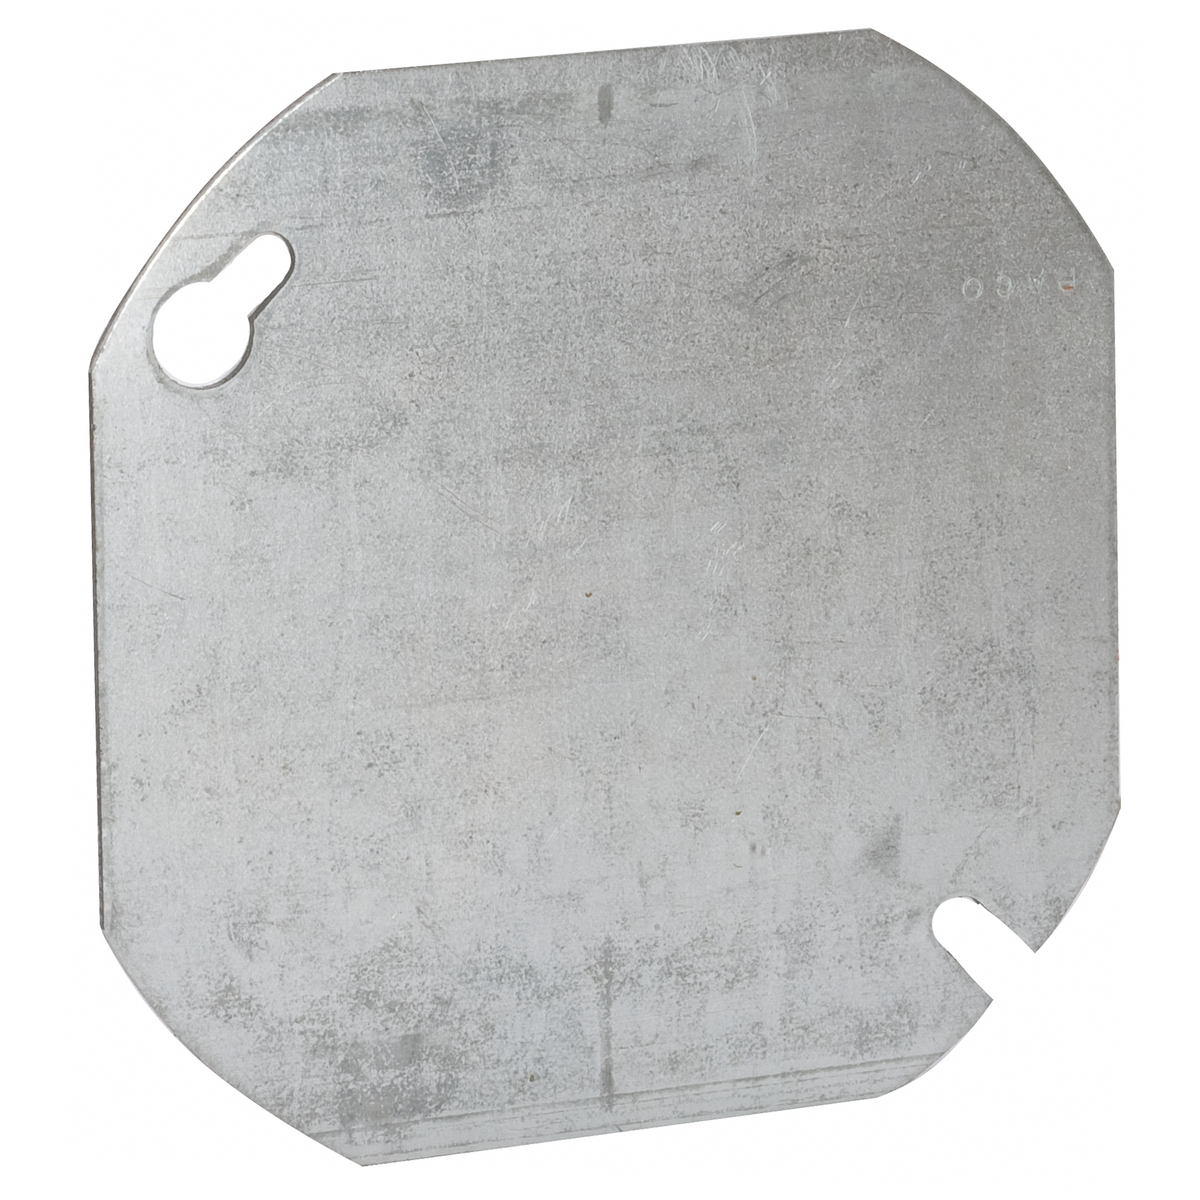 RACO 722 4" ROUND FLAT BLANK COVER